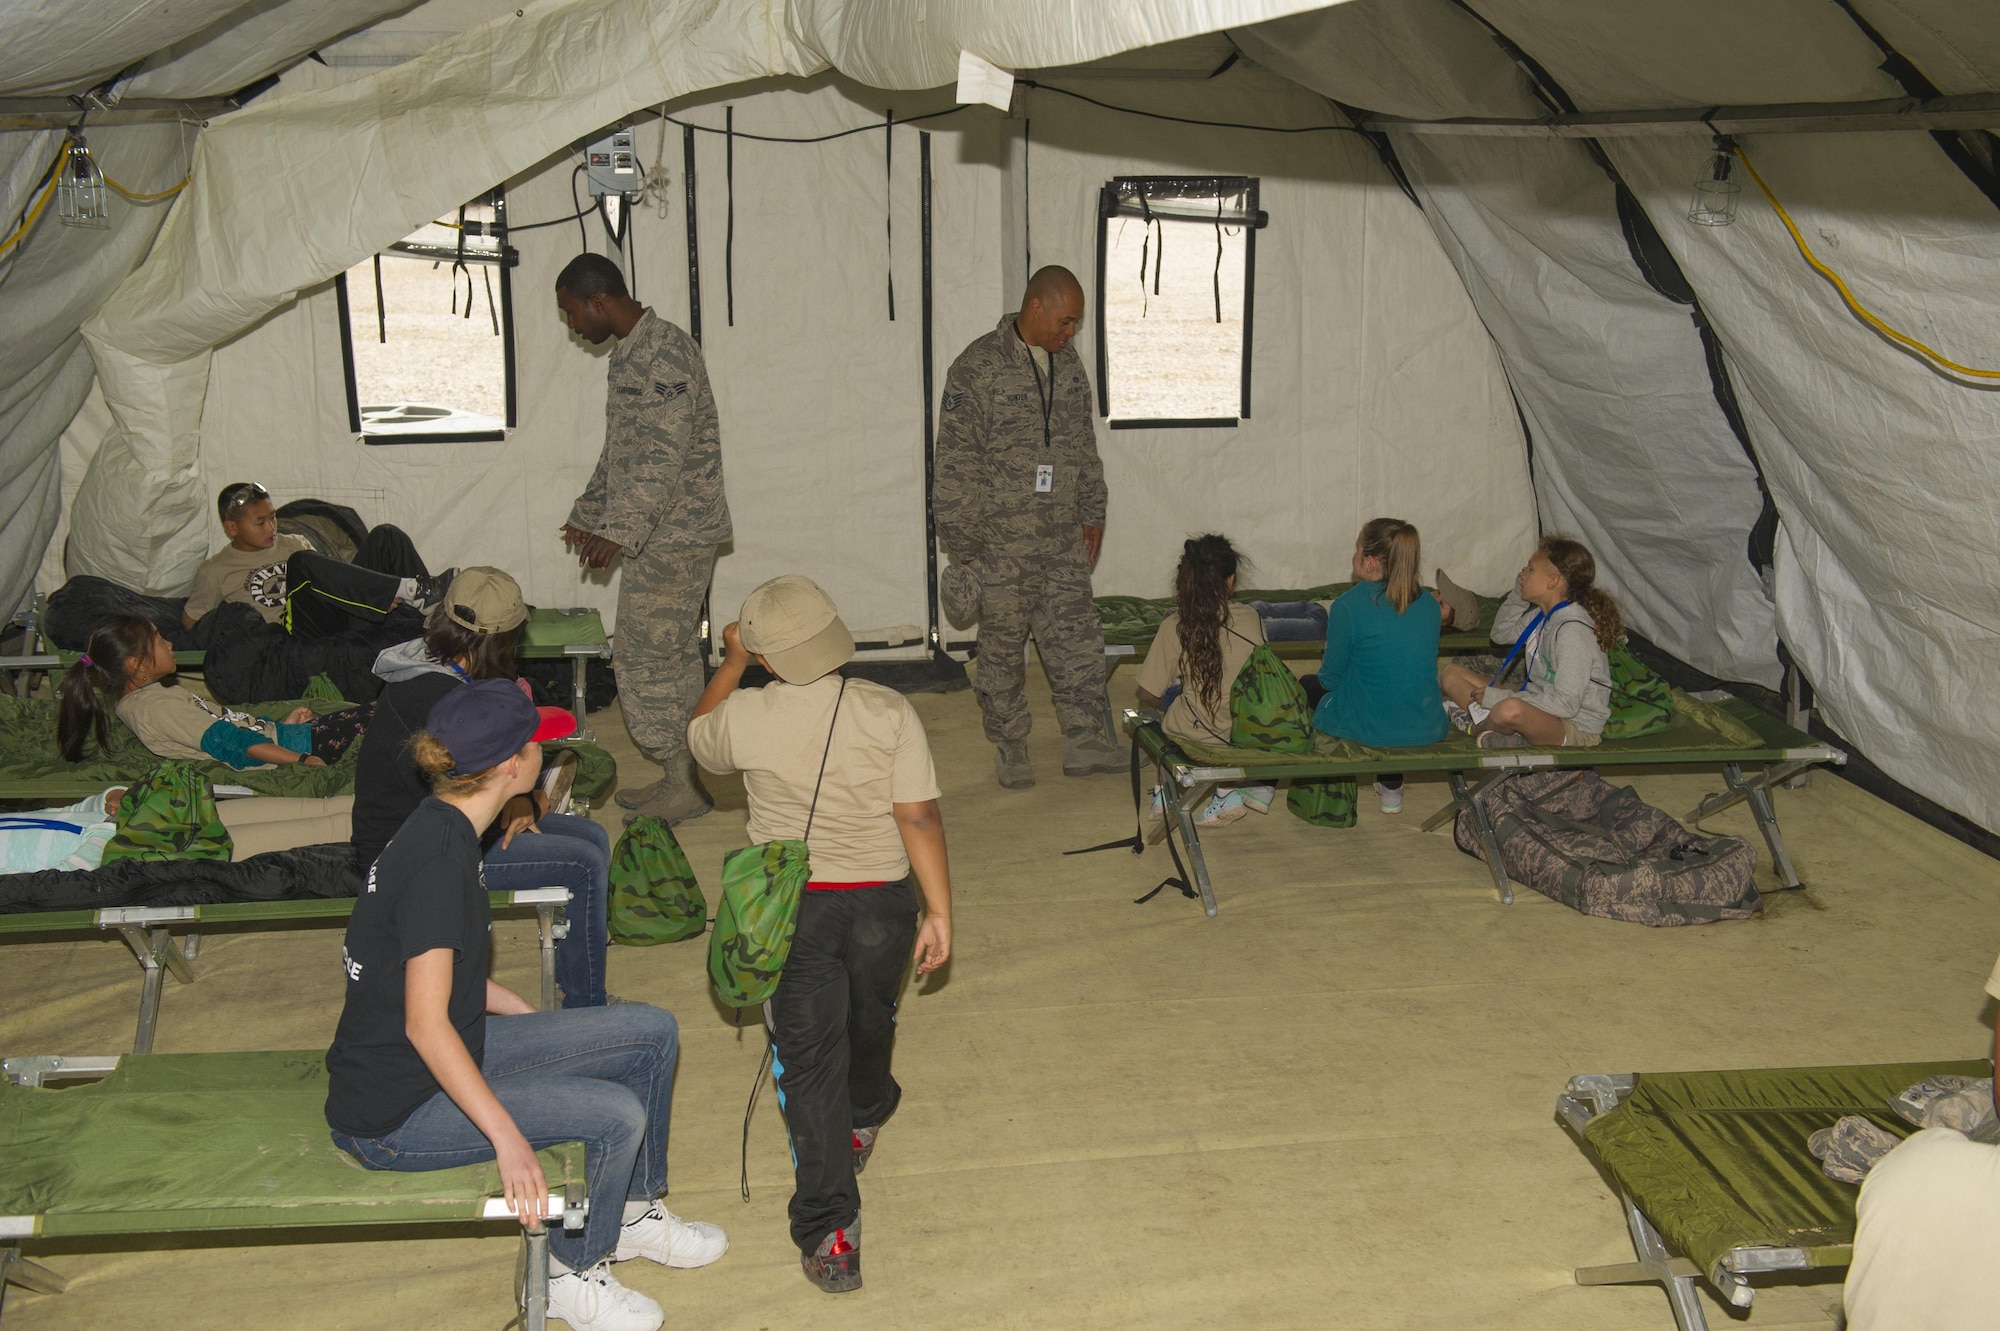 Children listen to a briefing about living out of tents during Operation K.I.D. (Kids Investigating Deployment), April 8 at Holloman Air Force Base, N.M. Each year, the Airmen and Family Readiness Center and the Youth Center host Operation K.I.D. in April, the Month of the Military Child. The A&FRC believes that it is important for children to experience what their parents go through during a deployment.